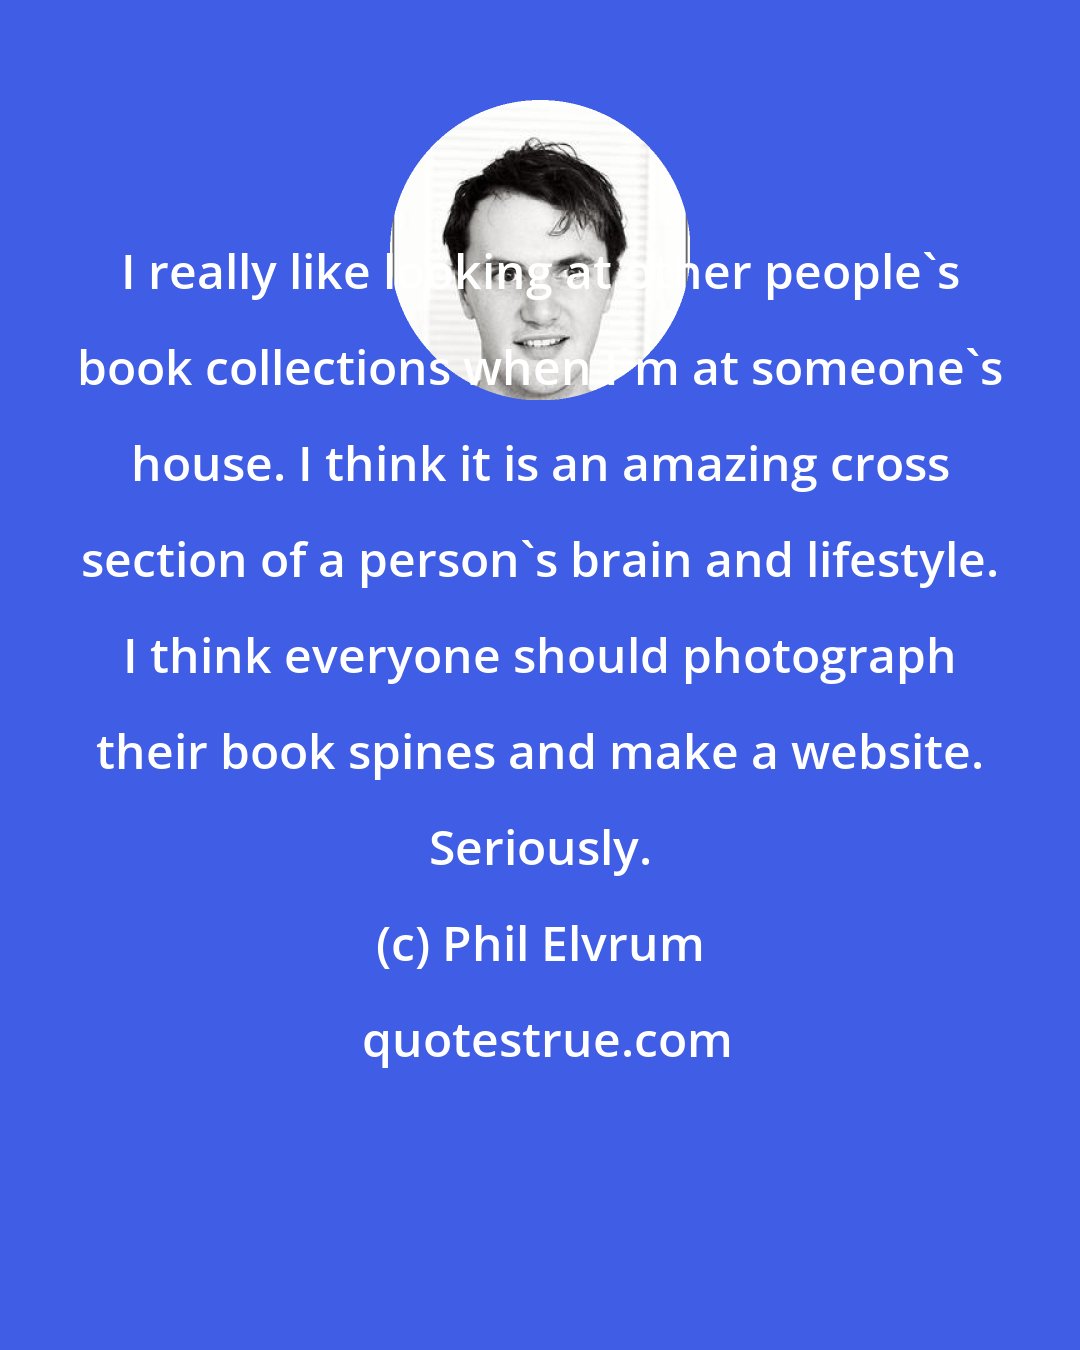 Phil Elvrum: I really like looking at other people's book collections when I'm at someone's house. I think it is an amazing cross section of a person's brain and lifestyle. I think everyone should photograph their book spines and make a website. Seriously.